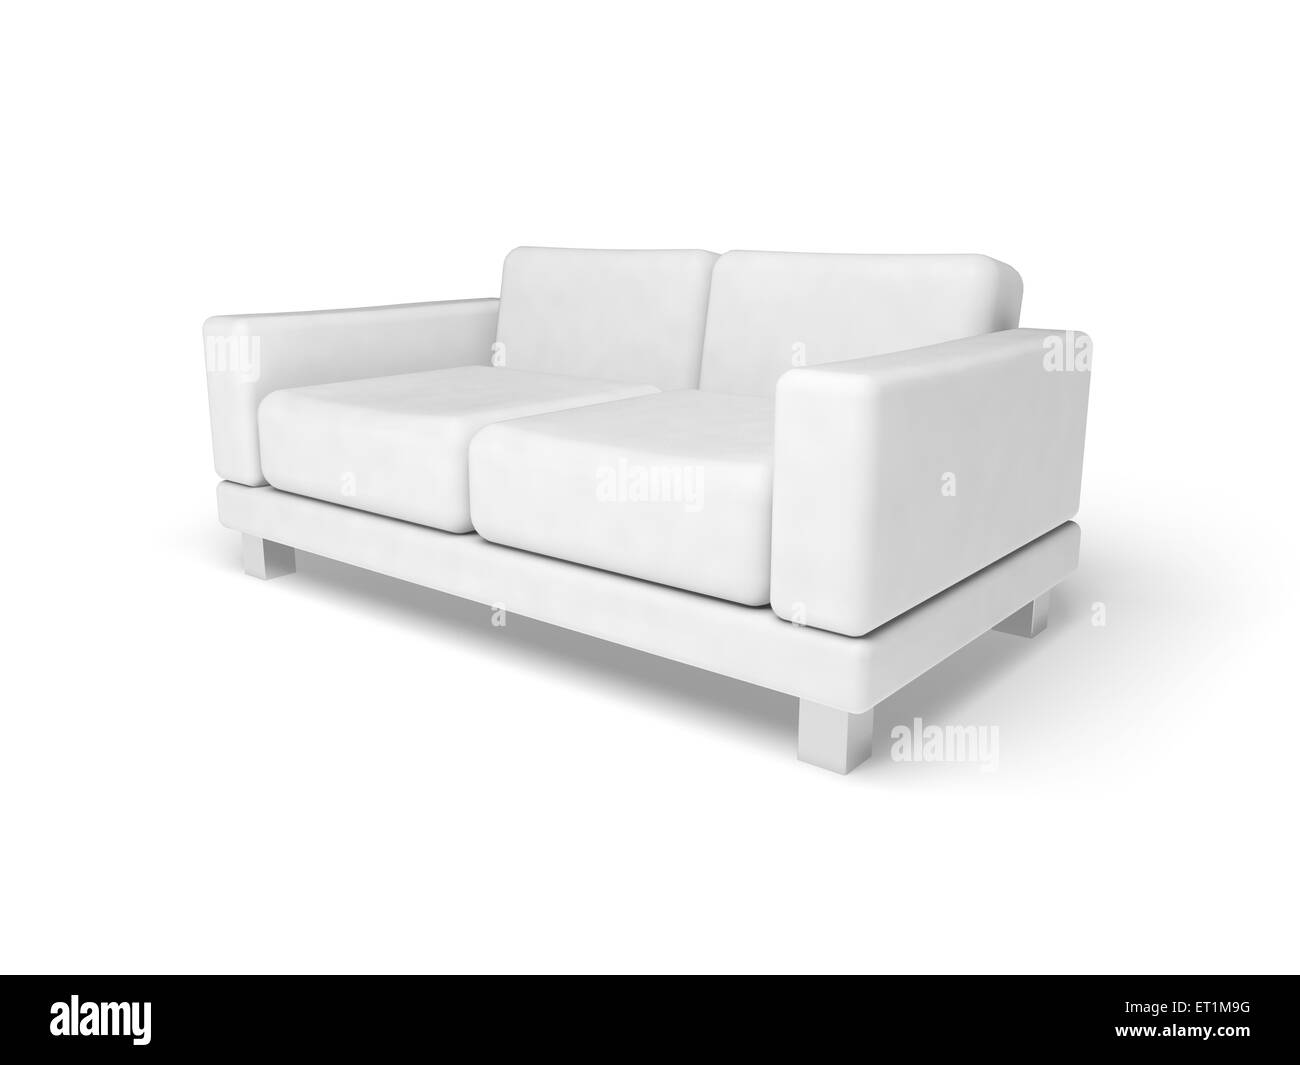 Sofa isolated on white empty floor background, 3d illustration, perspective view Stock Photo